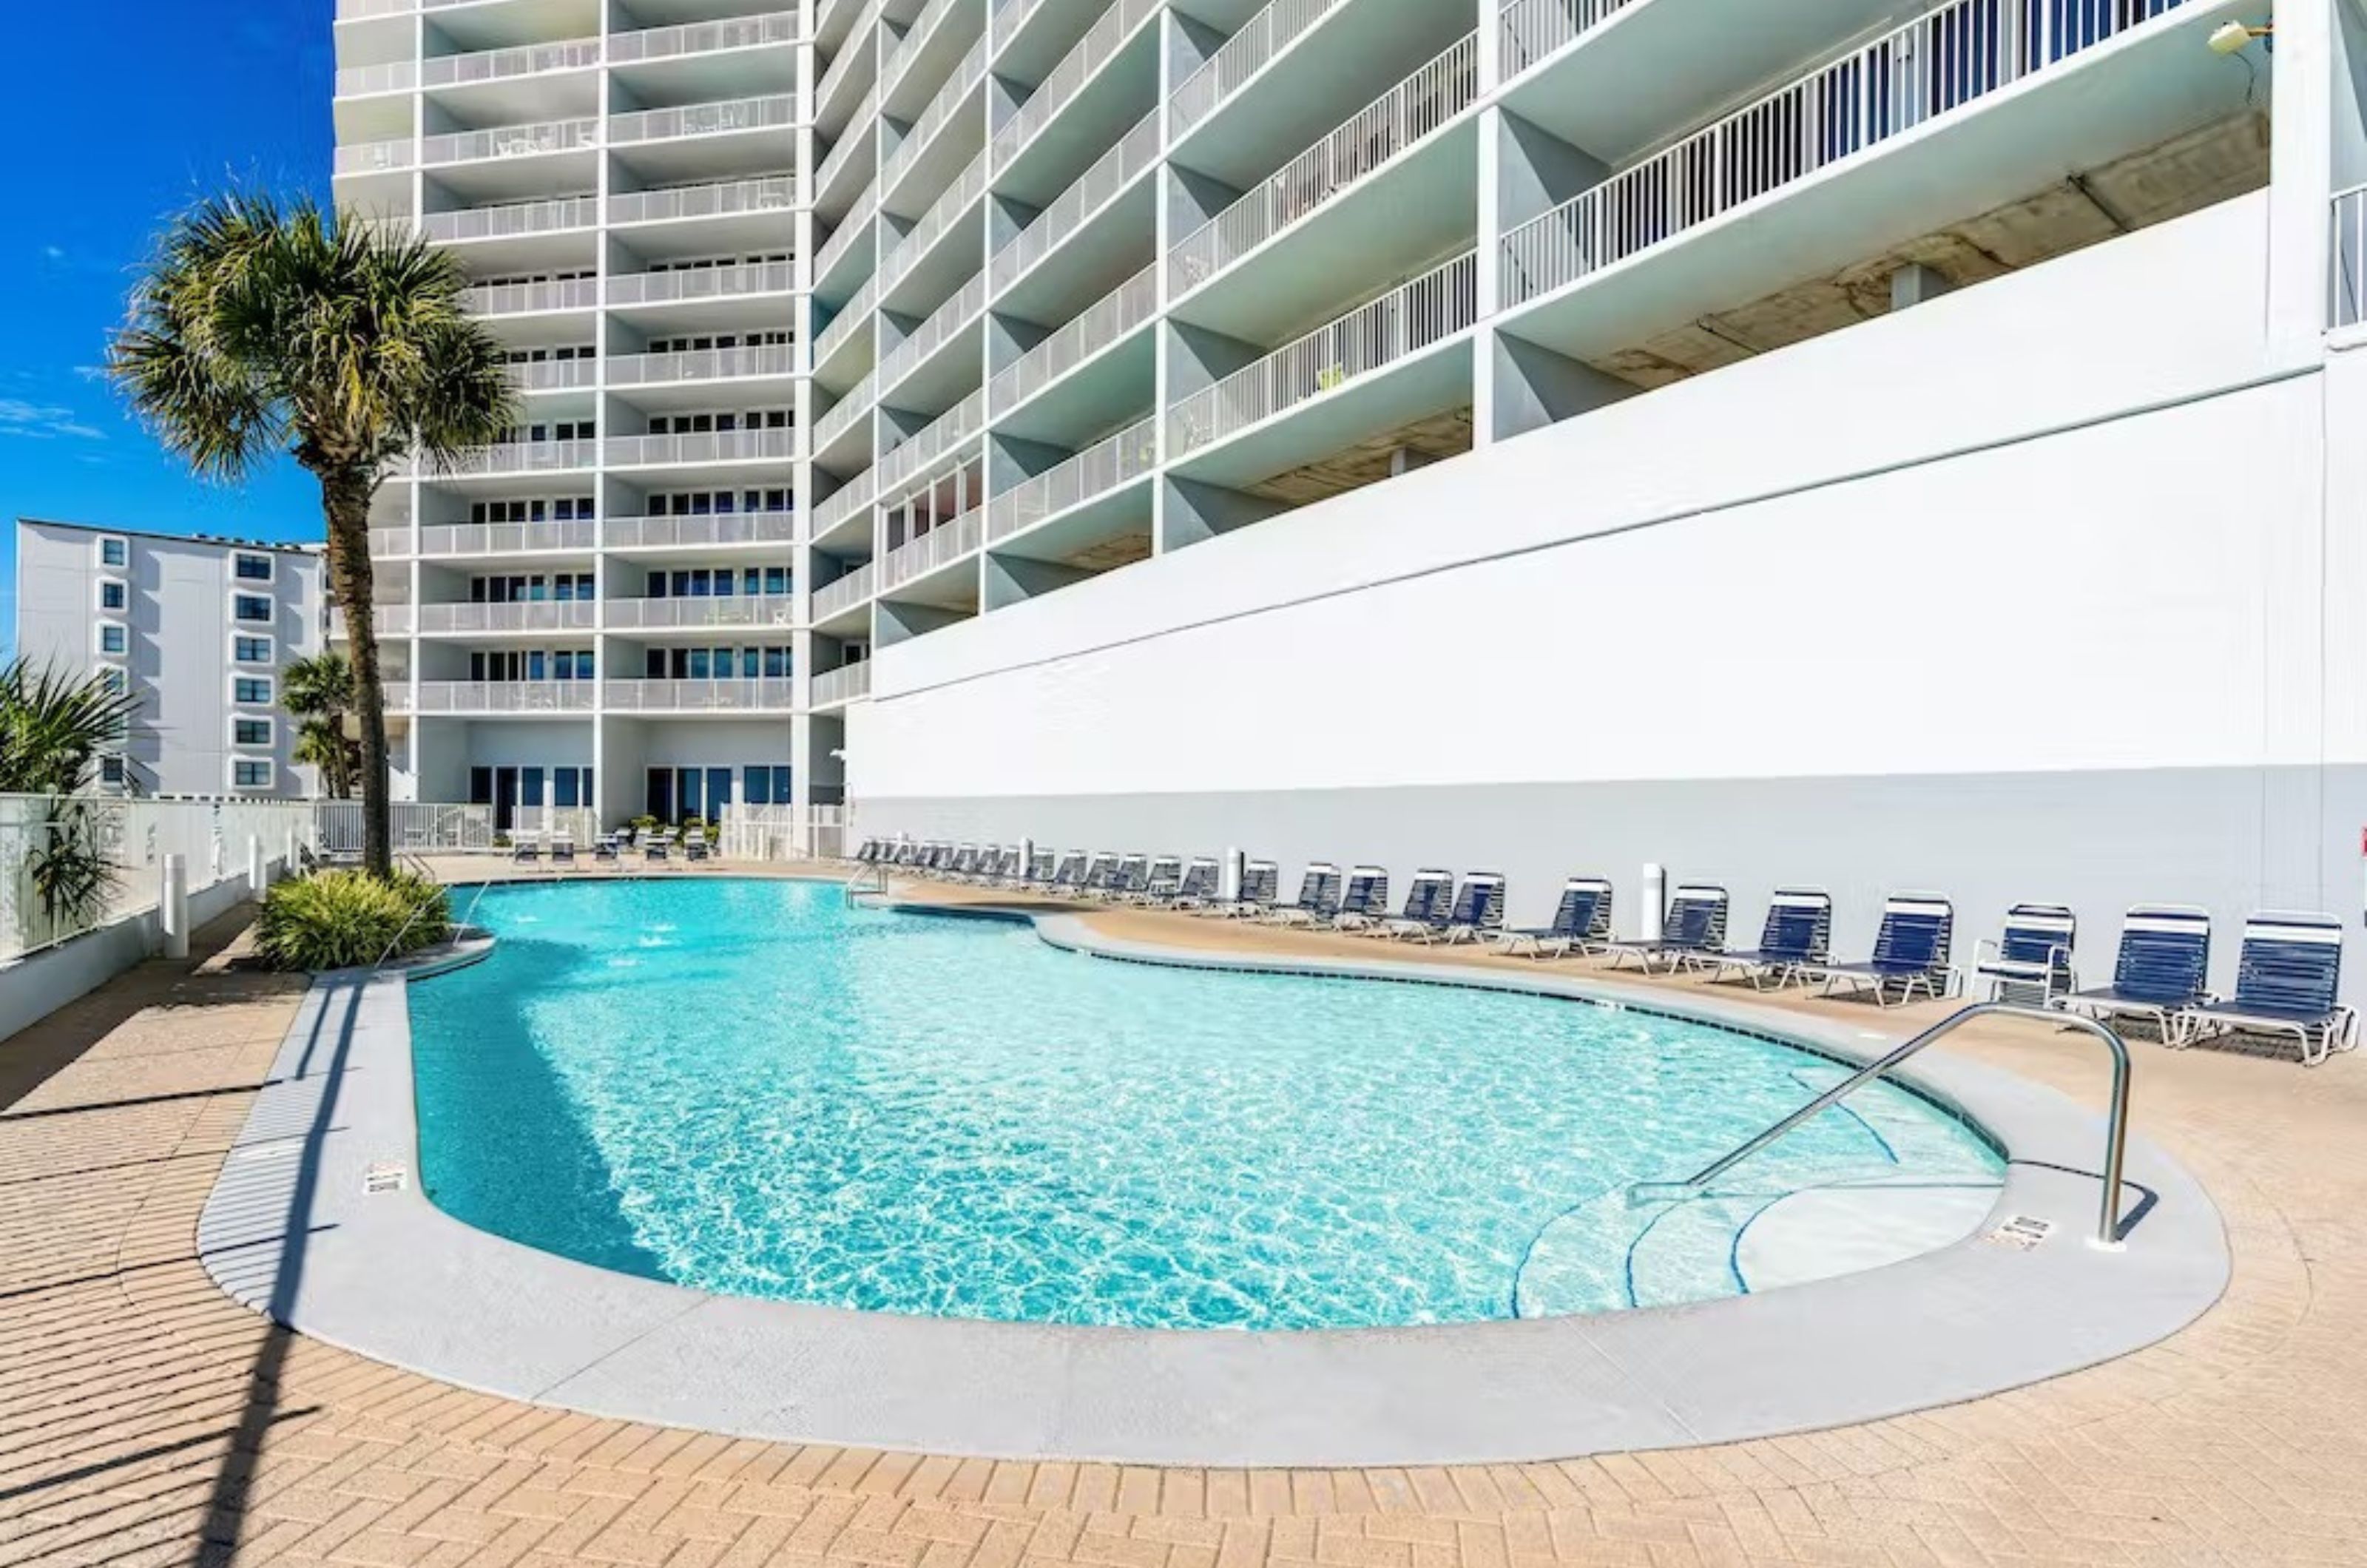 Outdoor swimming pool and deck next to Lighthouse Condominiums 